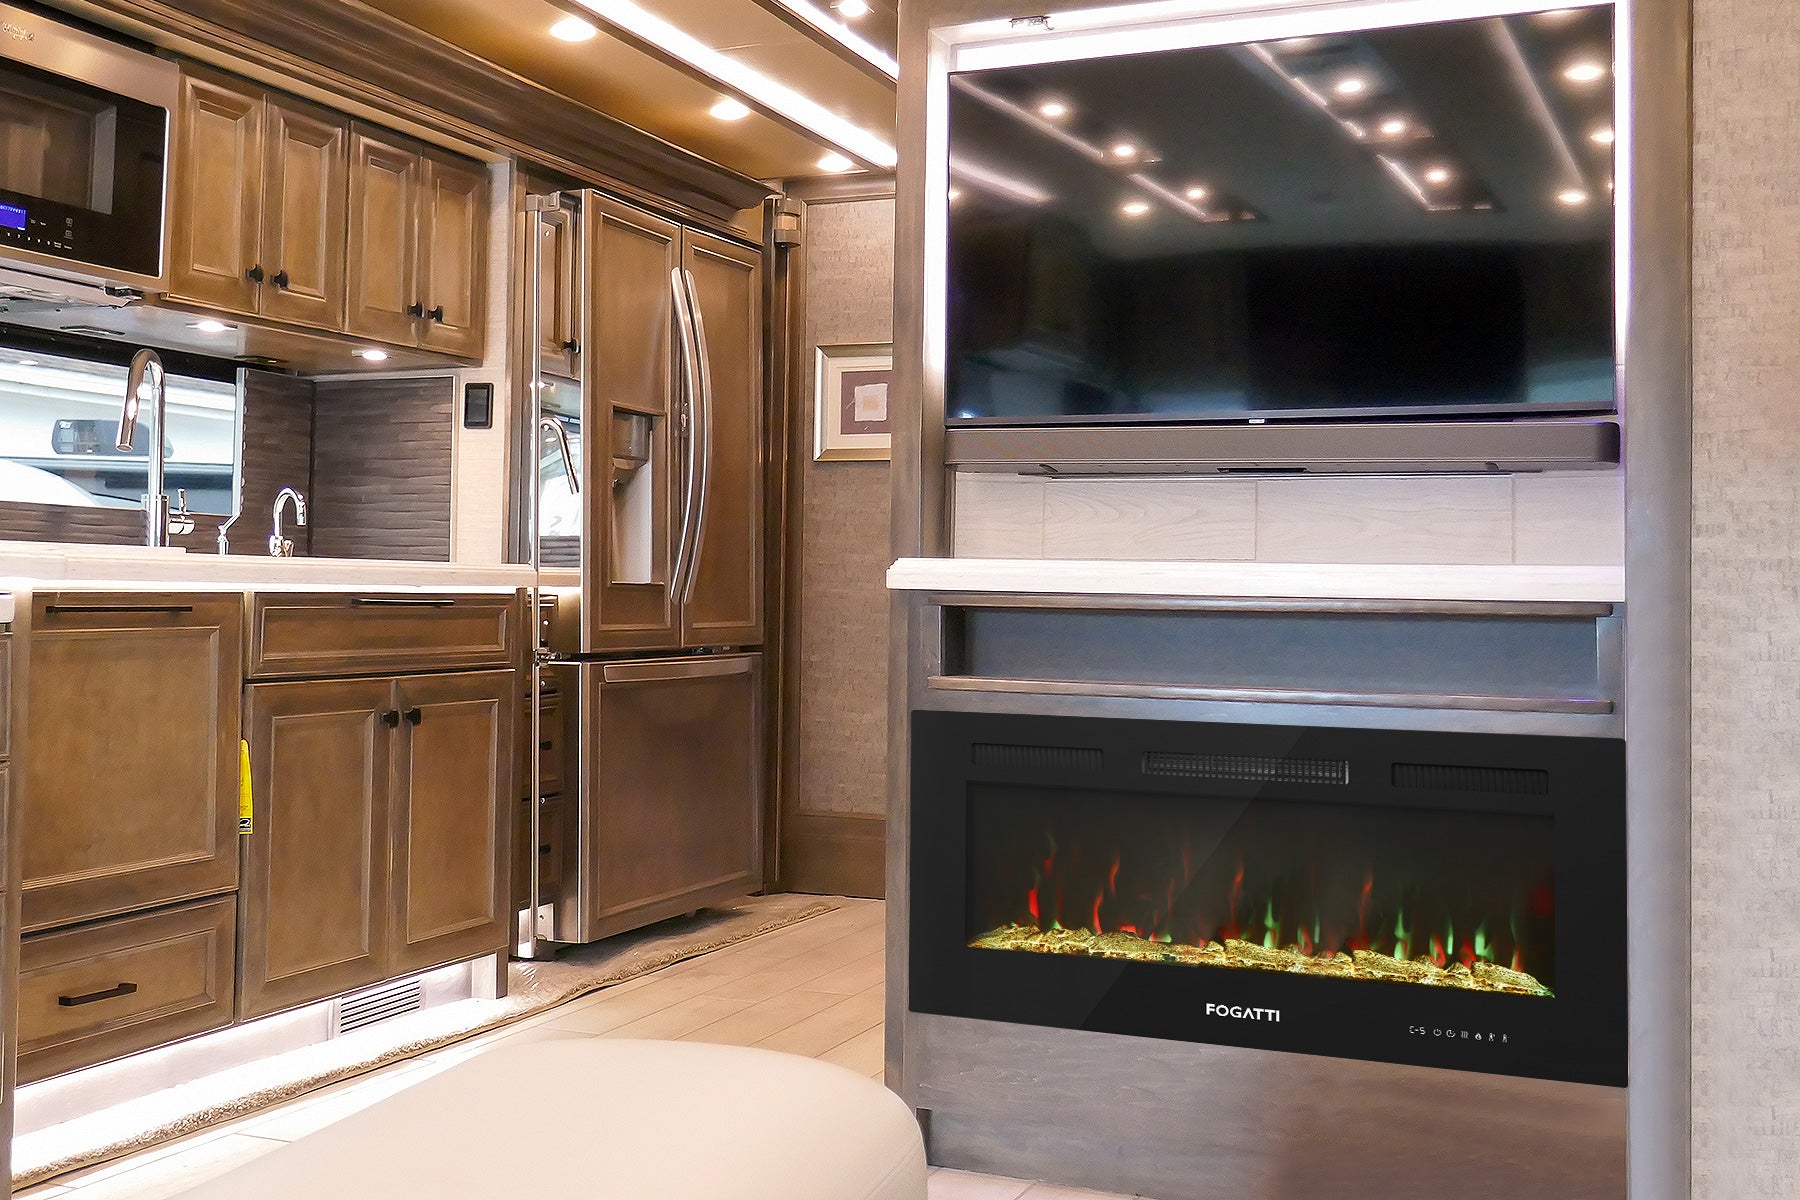 The Aesthetic Appeal of the Fogatti RV Electric Fireplace